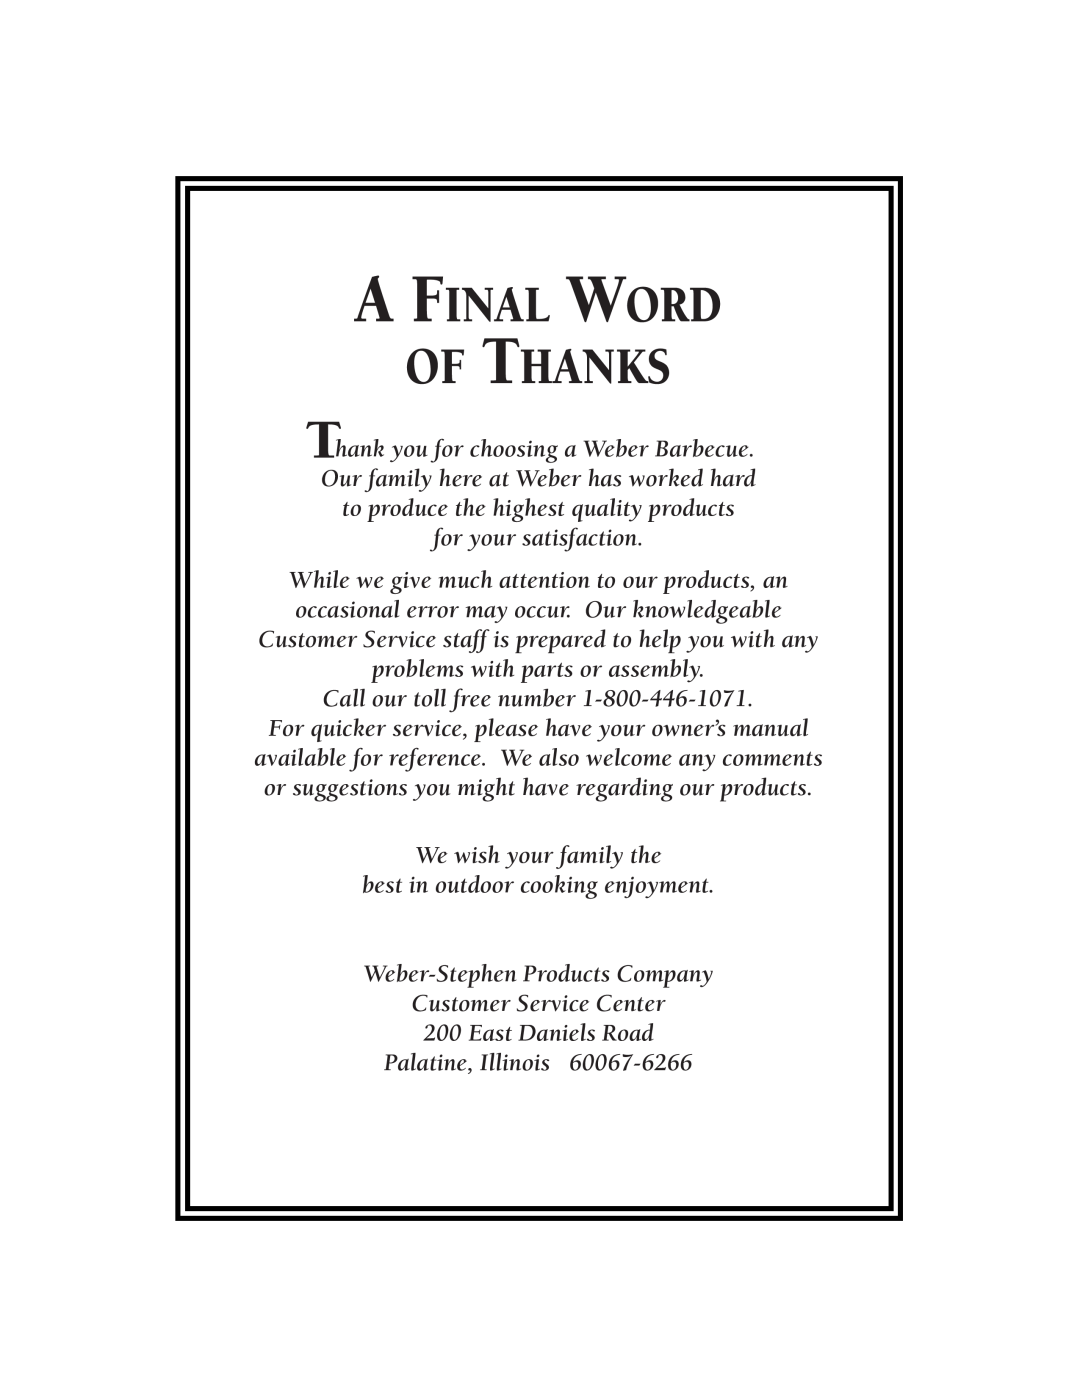 Weber 3000 LX owner manual A Final Word Of Thanks 